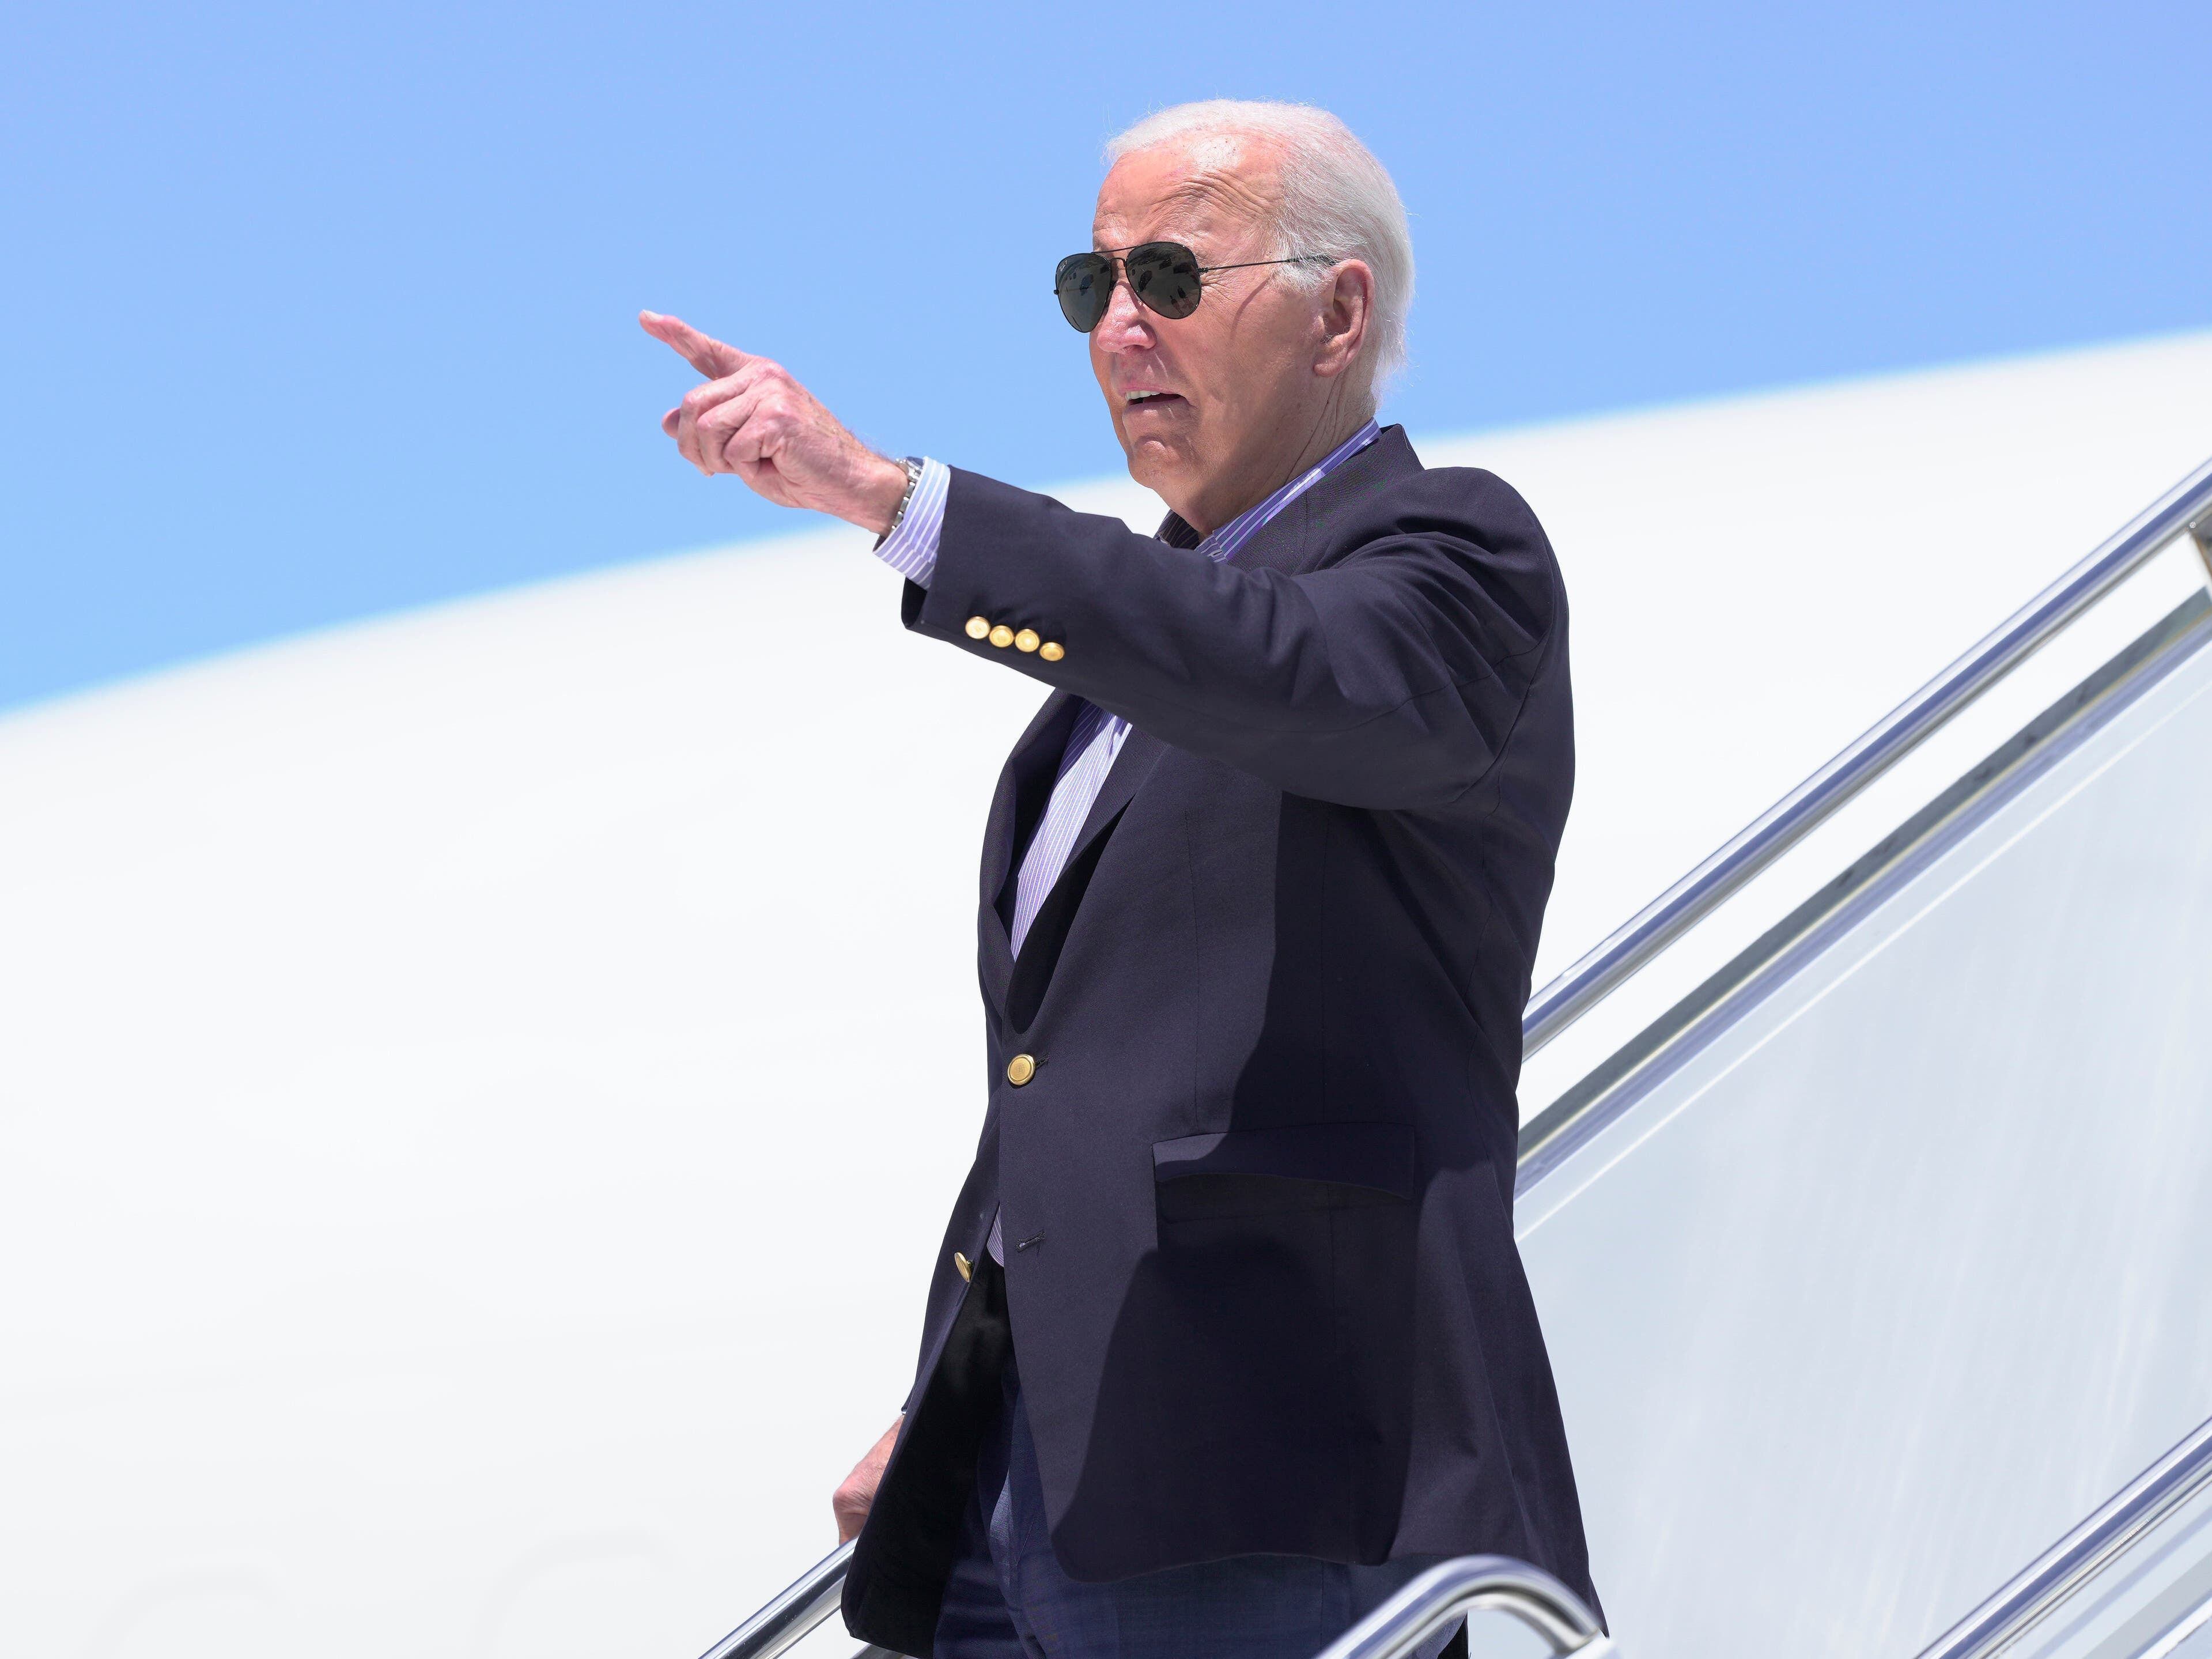 ‘I’m staying in race’ says Biden as US president scrambles to save re-election